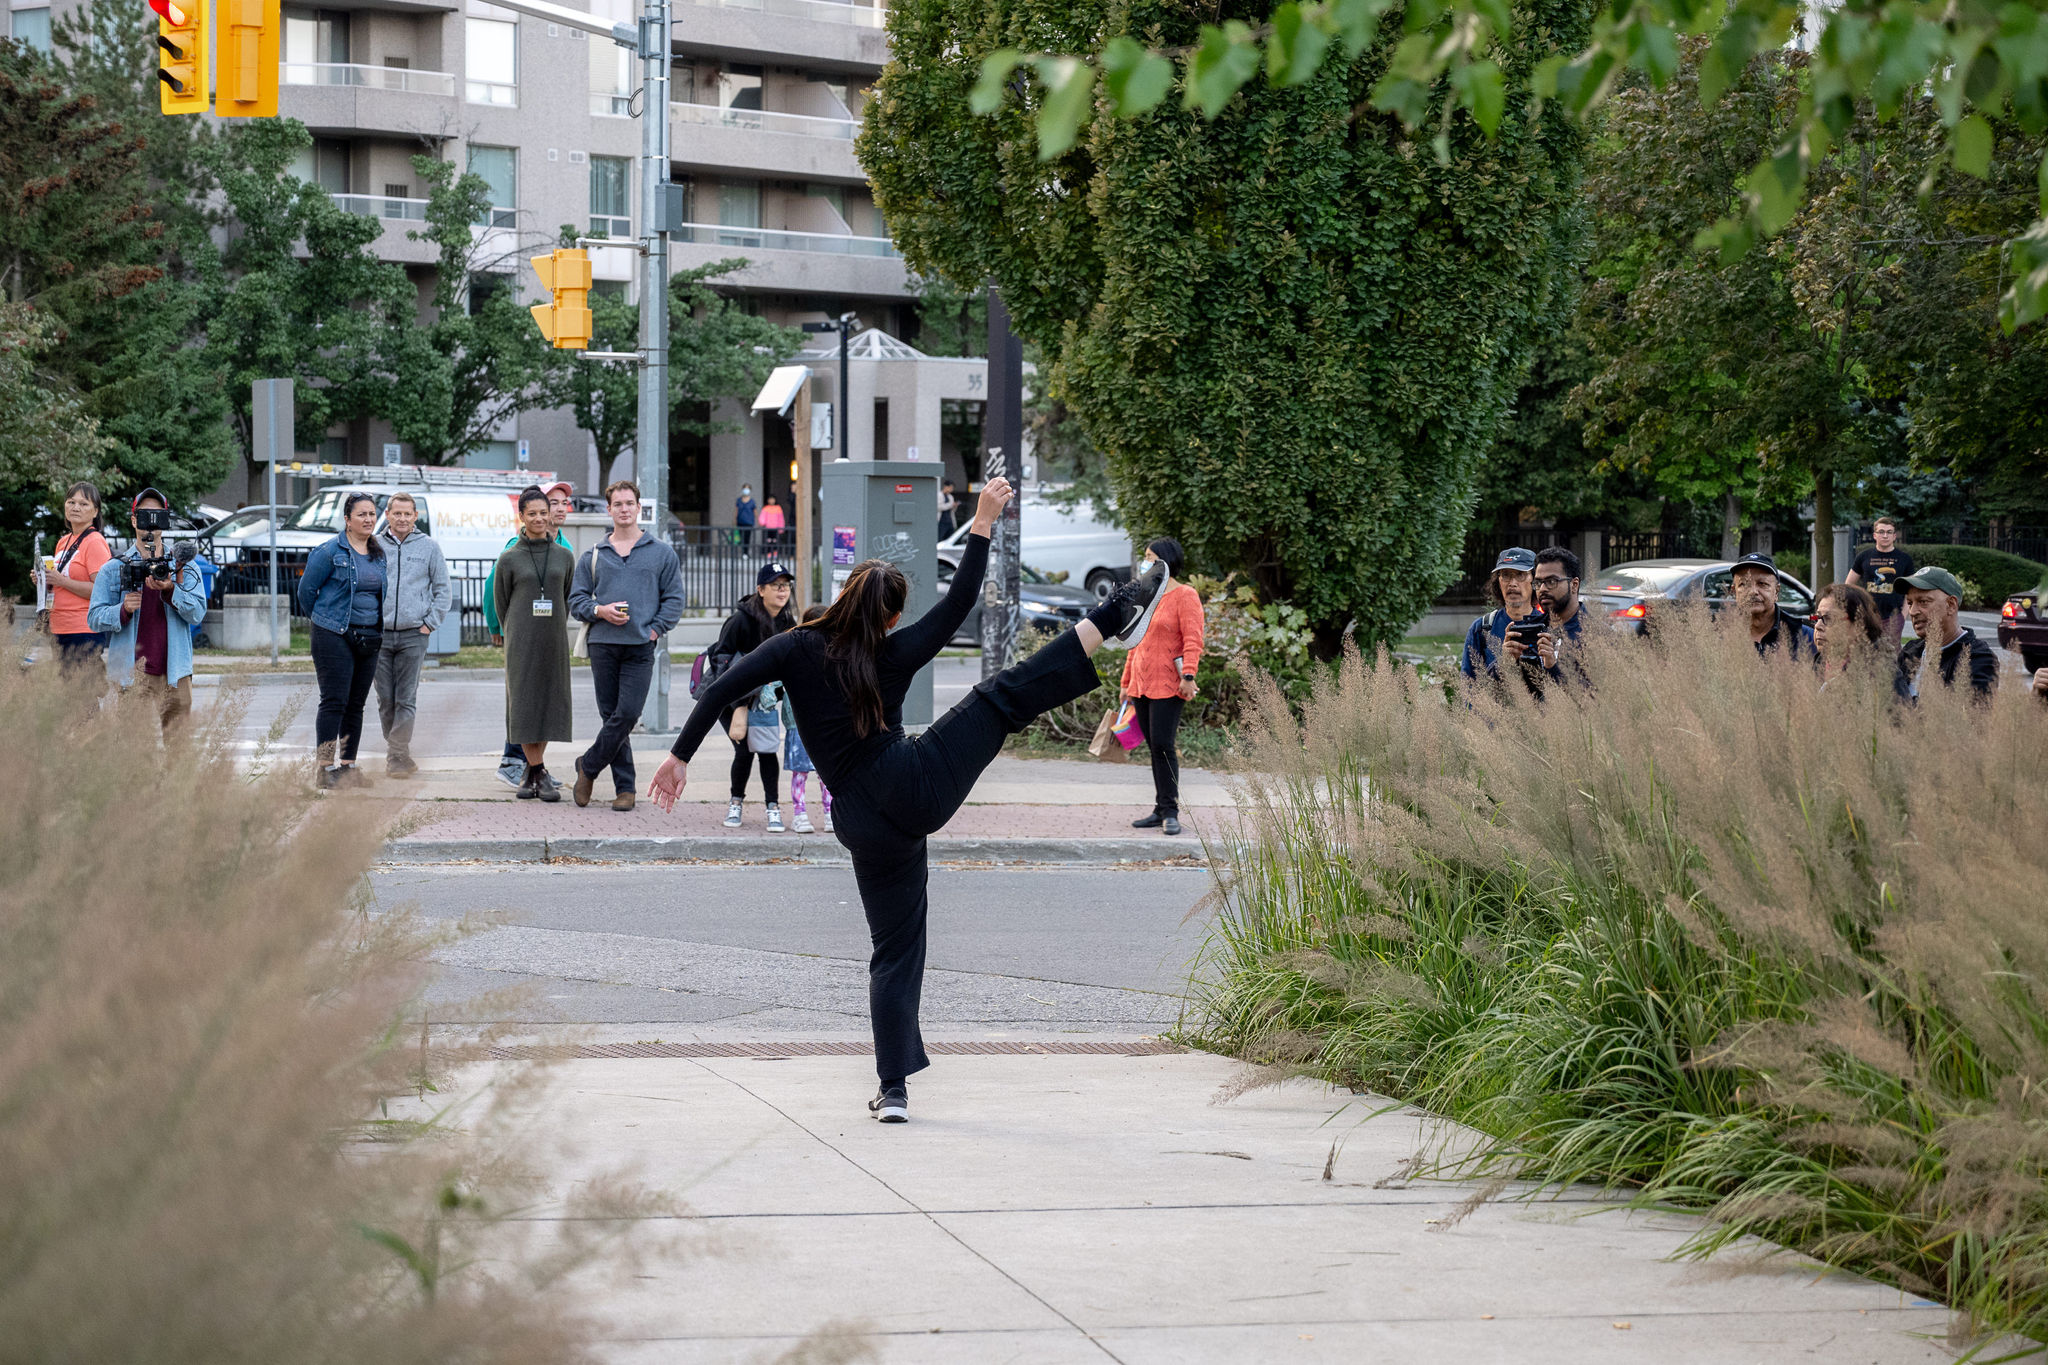 A woman dancer in black performs on a sidewalk as passersby watch.